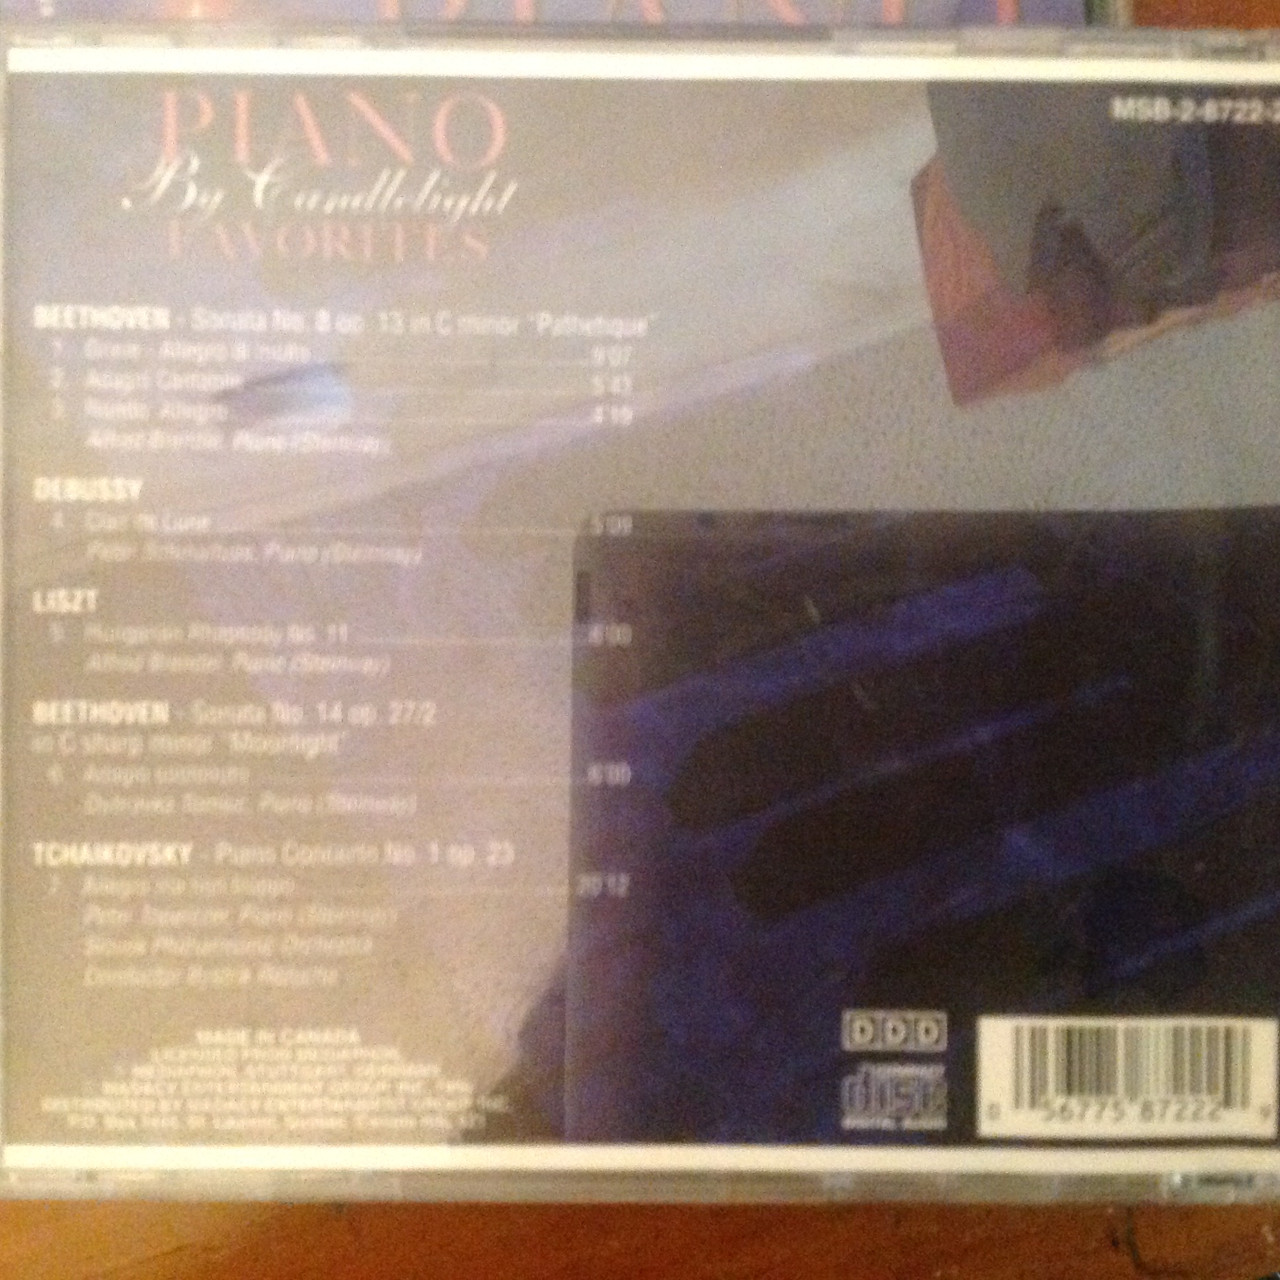 Piano By Candlelight Favorites 3 CD's